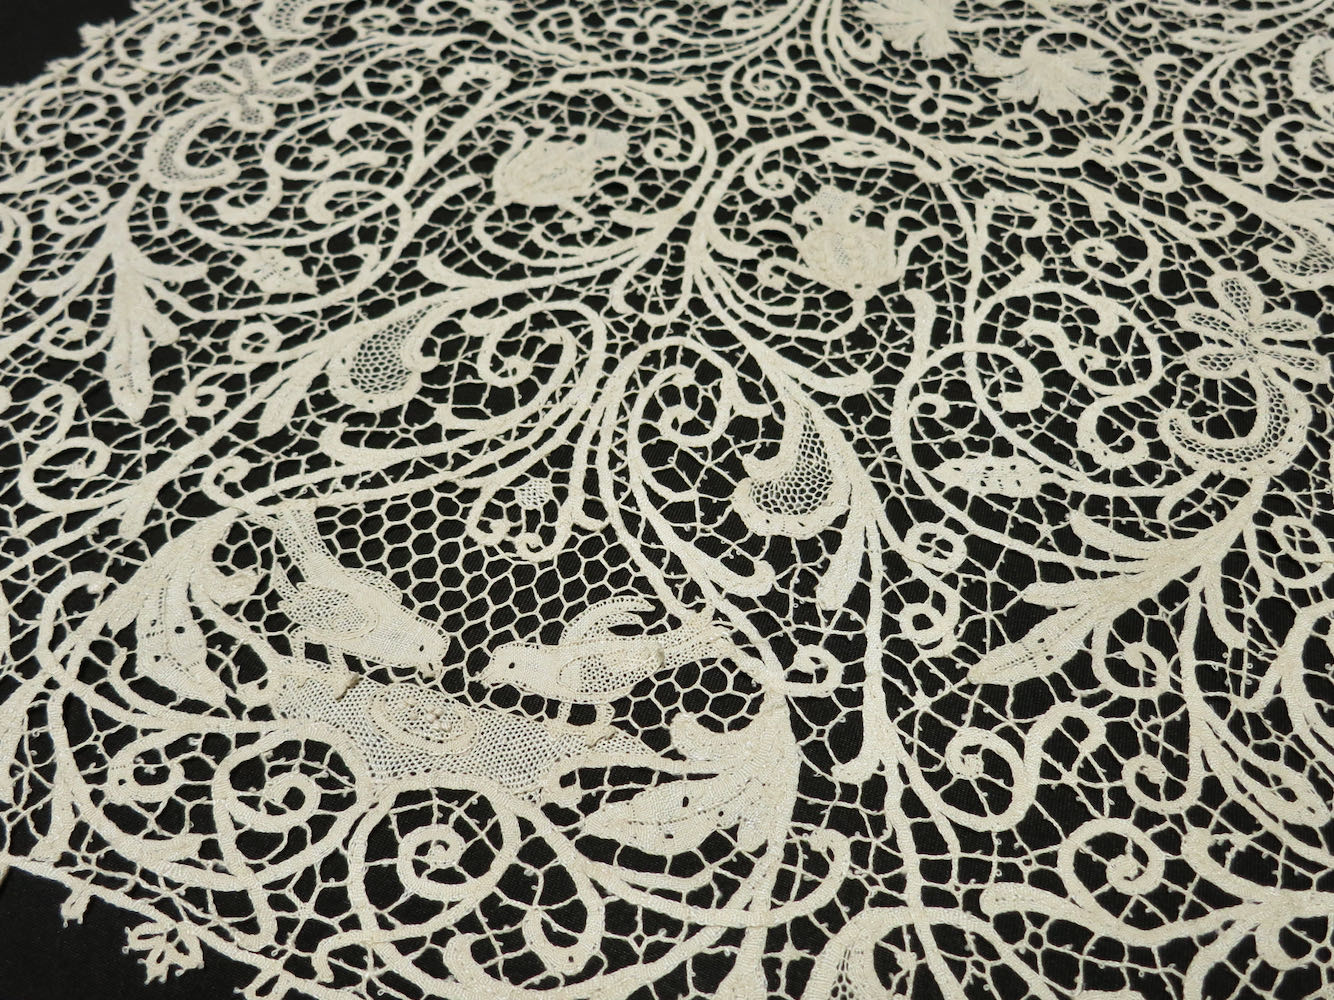 Birds Nest w/ Eggs Antique Italian Lace Table Runner 16x52 - Things Most  Delightful